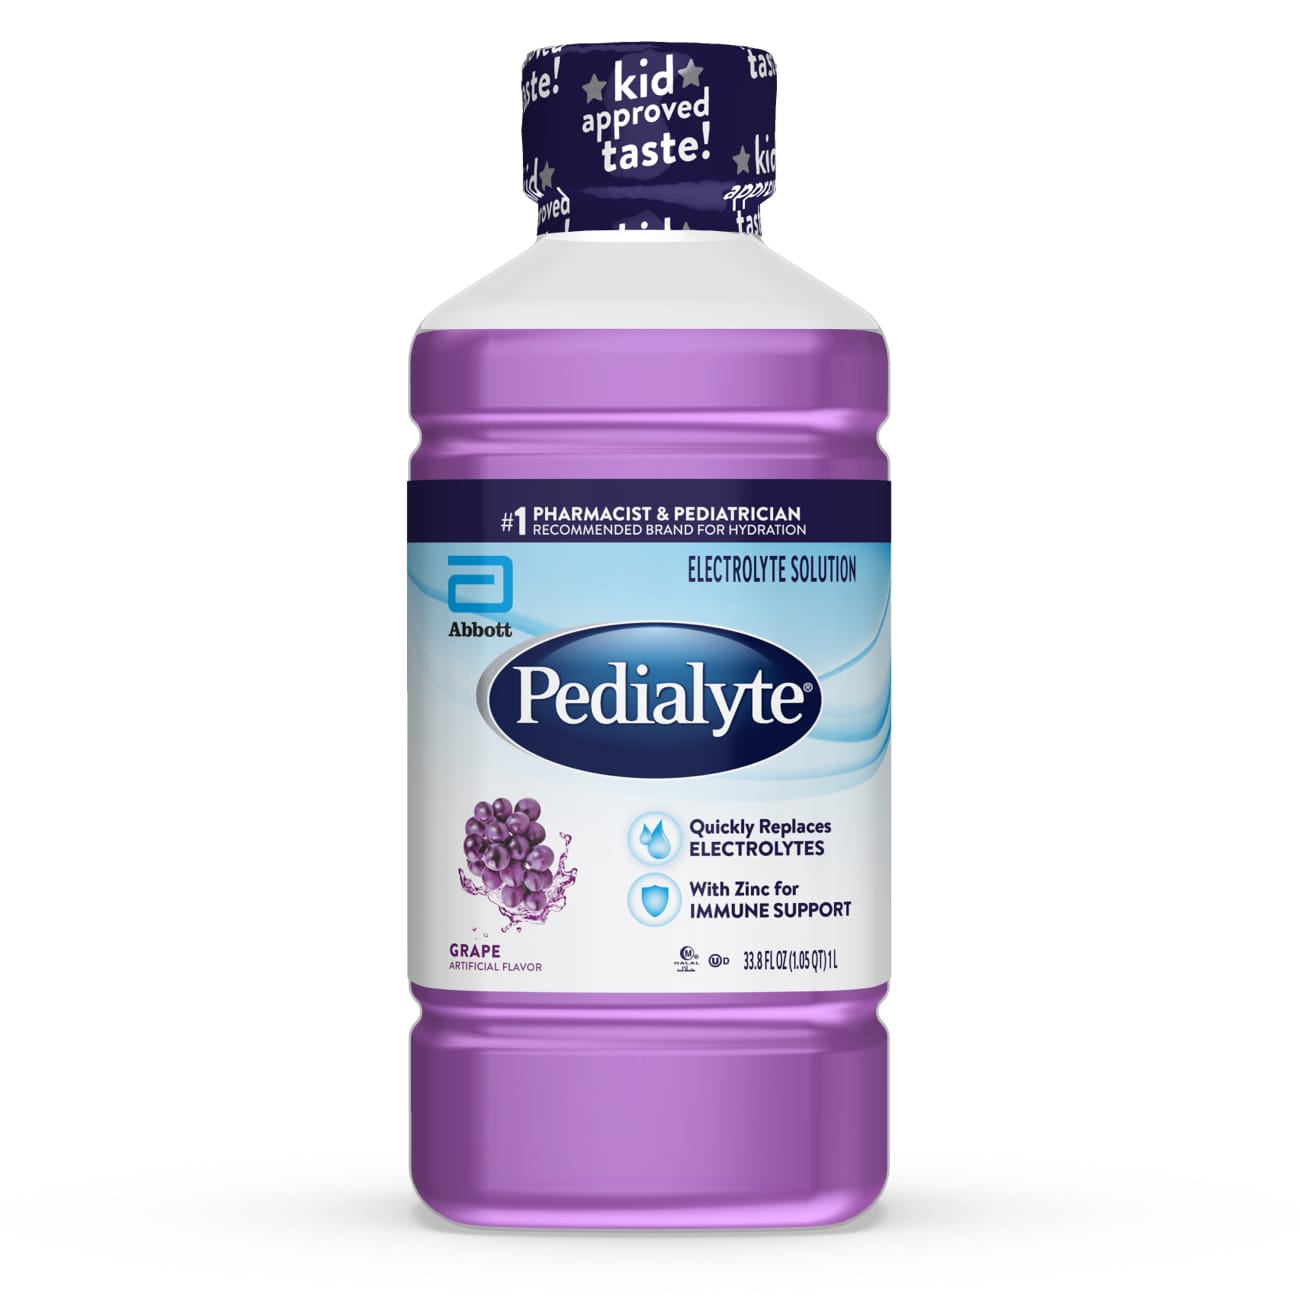 Pedialyte Electrolyte Solution Ready-to-Drink 33.8 fl oz, 1CT